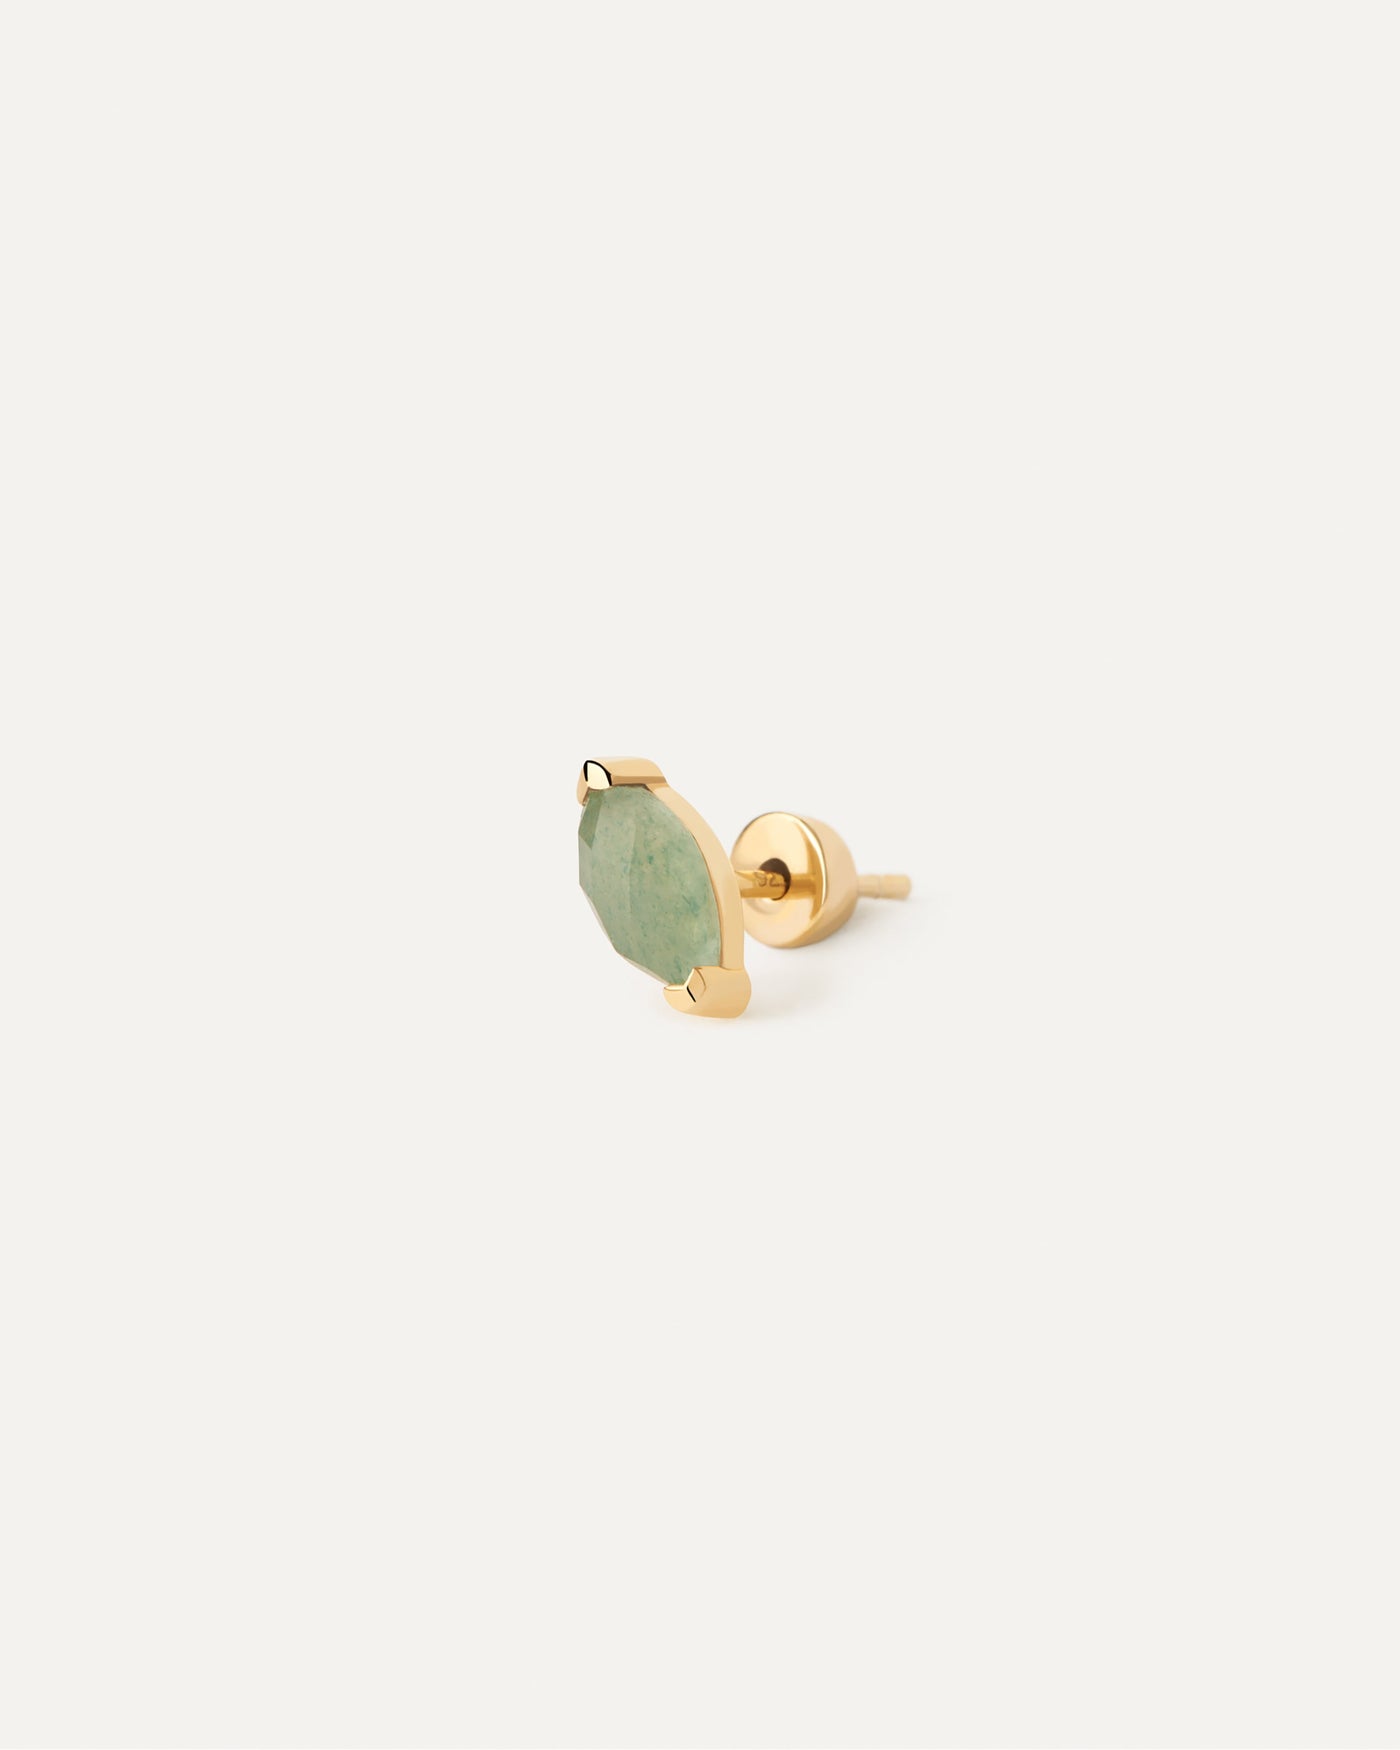 2023 Selection | Green Aventurine Nomad Single Earring. Gold-plated stud earring set with eye shape white zirconia multi-stone cluster. Get the latest arrival from PDPAOLA. Place your order safely and get this Best Seller. Free Shipping.